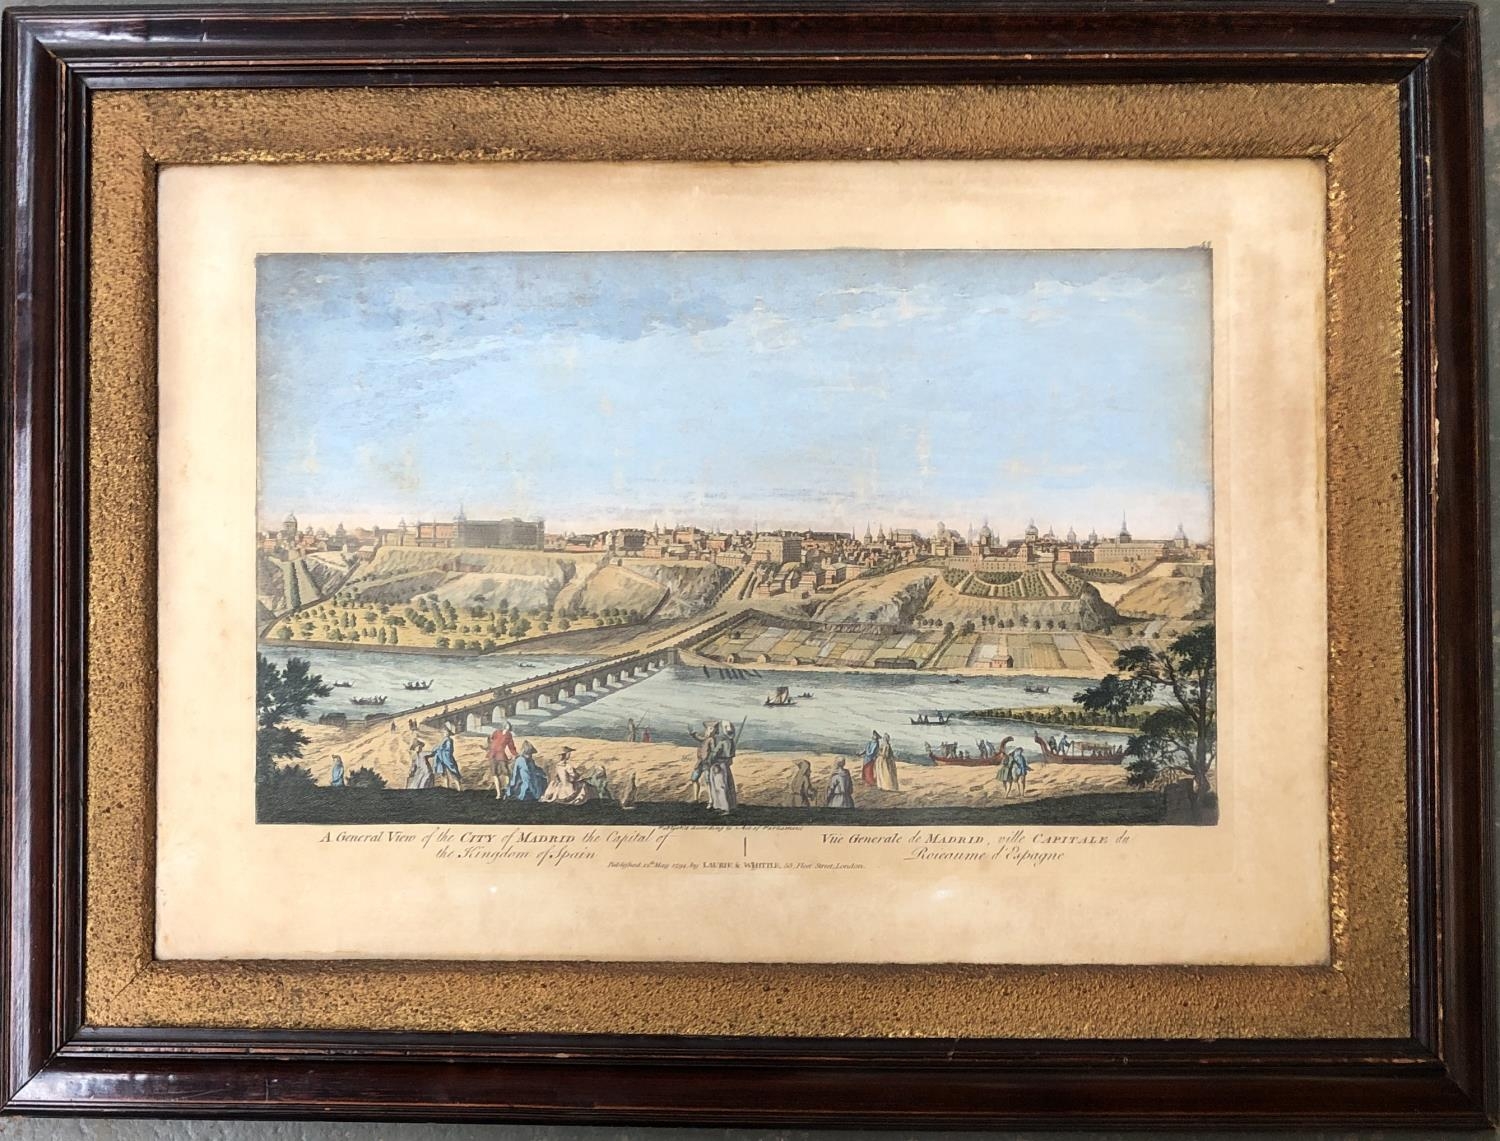 Late 18th century hand coloured engraving 'A General View of The City of Madrid' published 1794 by